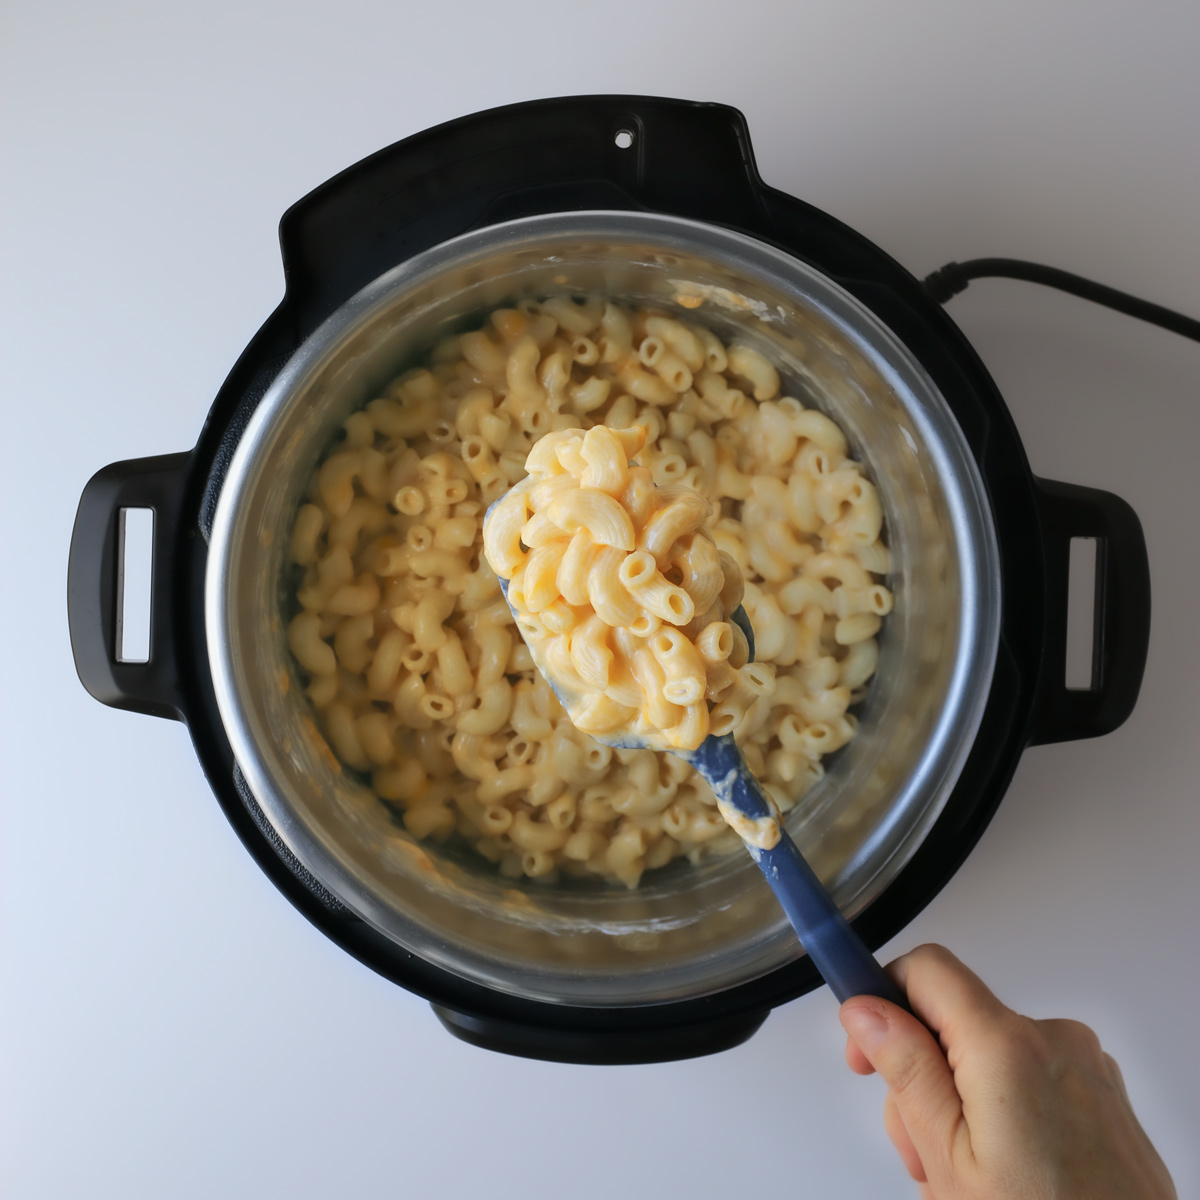 the finished mac and cheese in the pot.